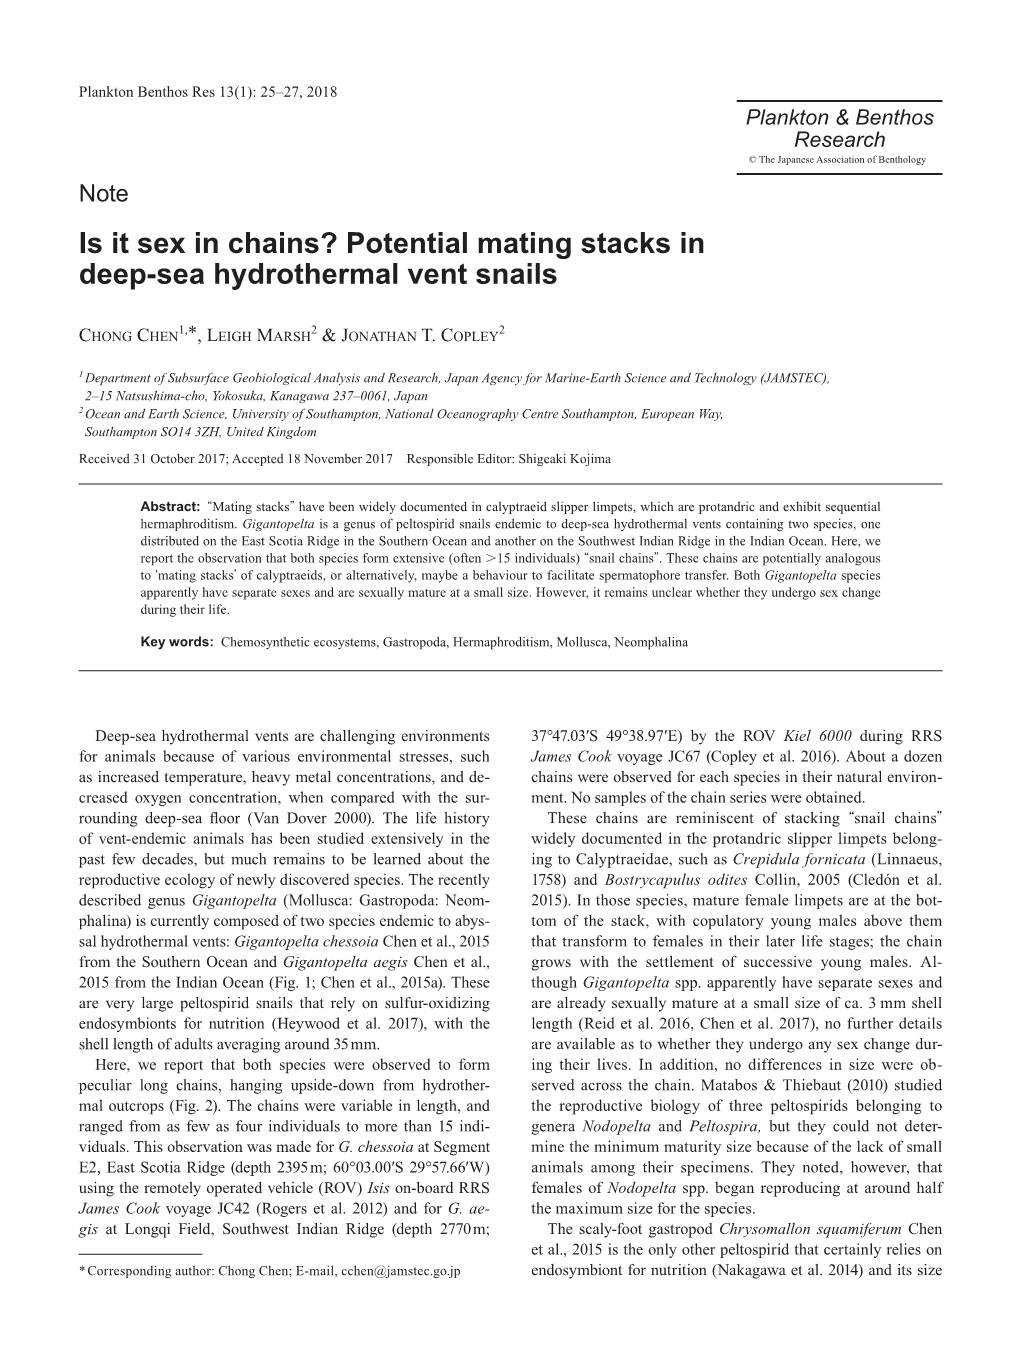 Is It Sex in Chains? Potential Mating Stacks in Deep-Sea Hydrothermal Vent Snails